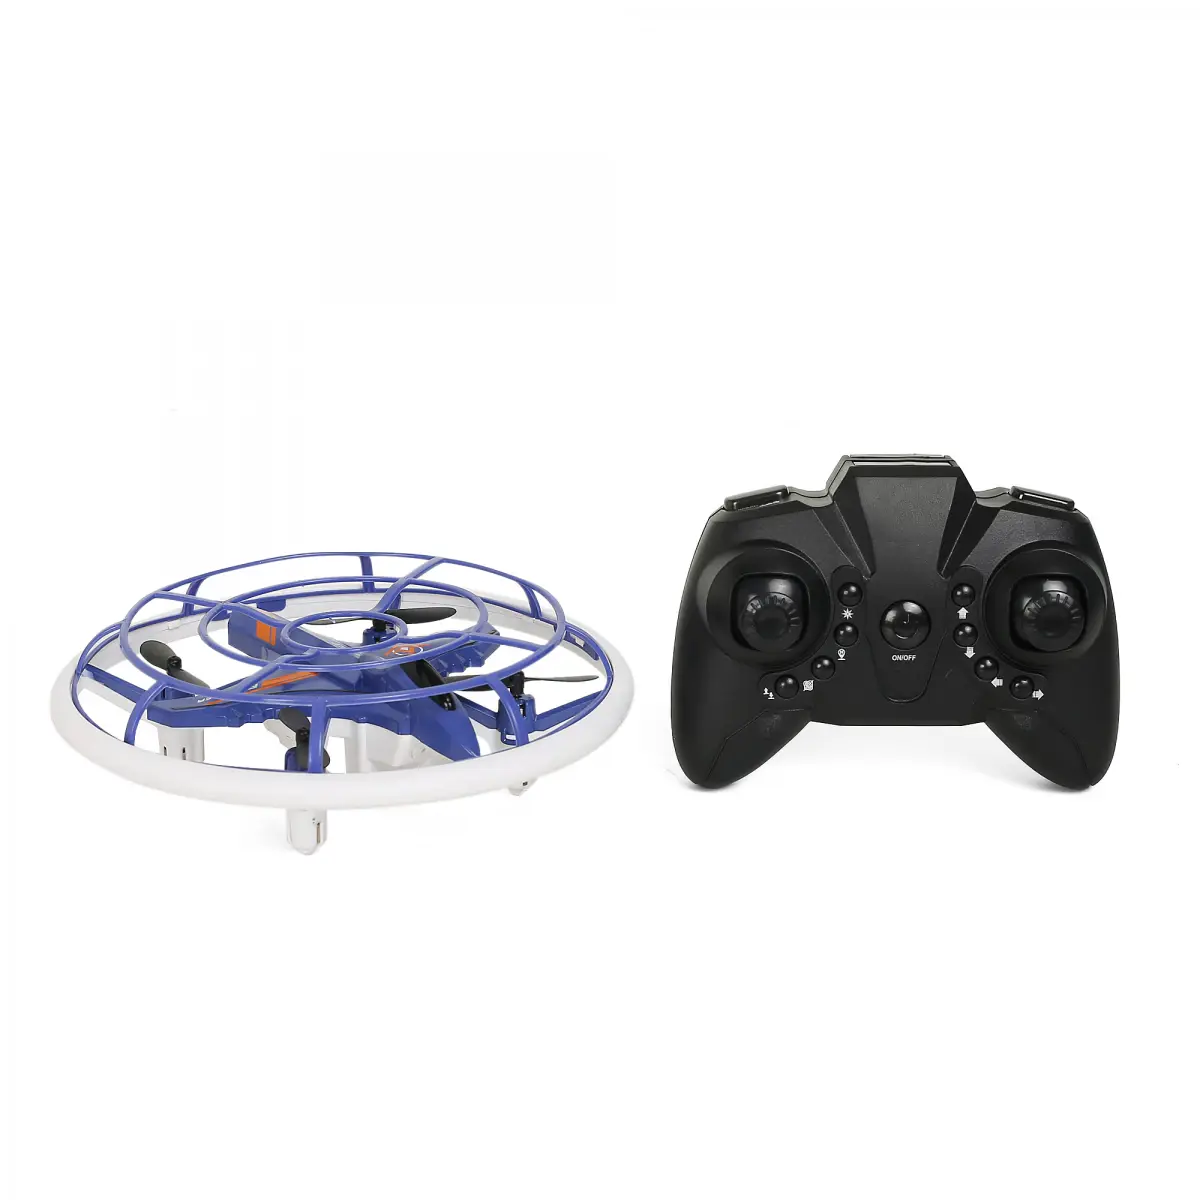 Ralleyz Breeze Drone with LED Lights, 14Y+, Blue